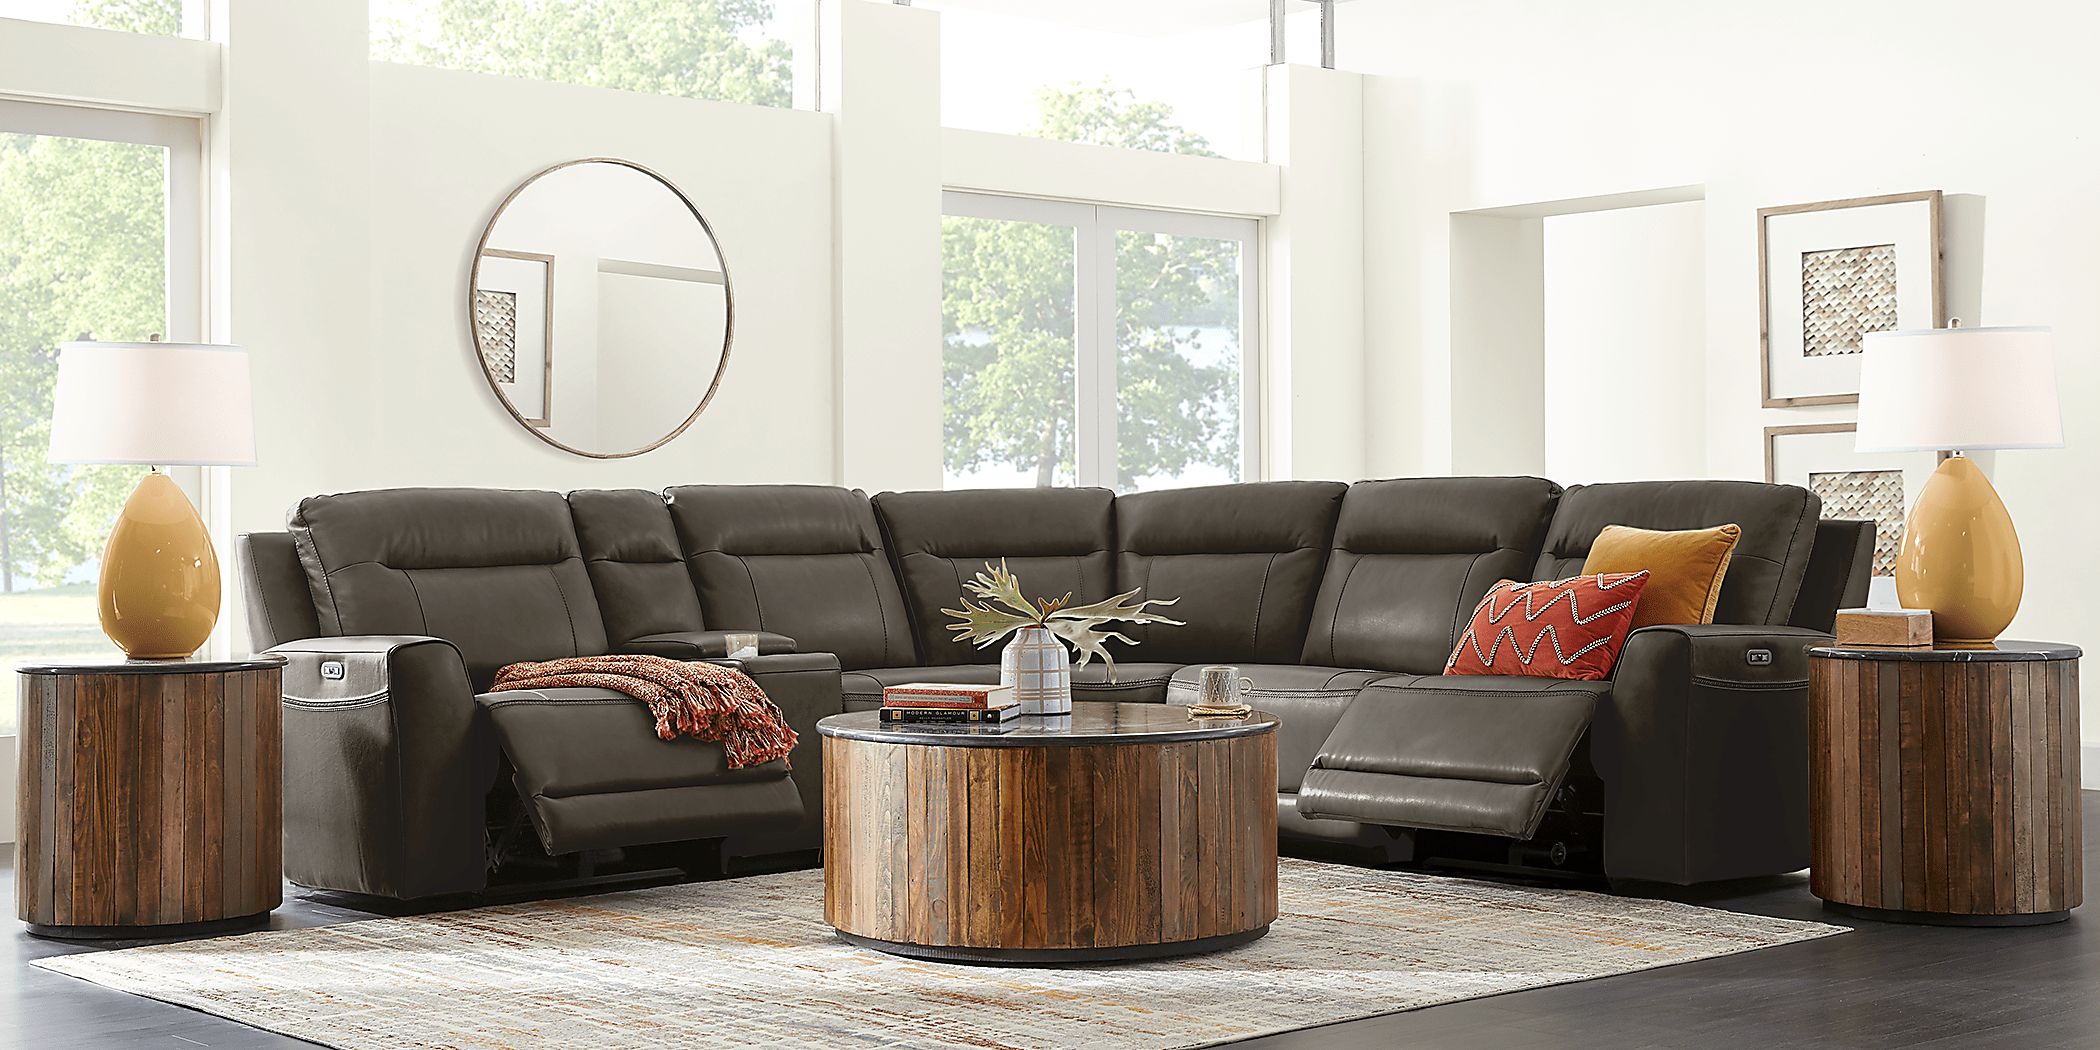 Bargotti Charcoal Leather 6 Pc Dual Power Reclining Sectional